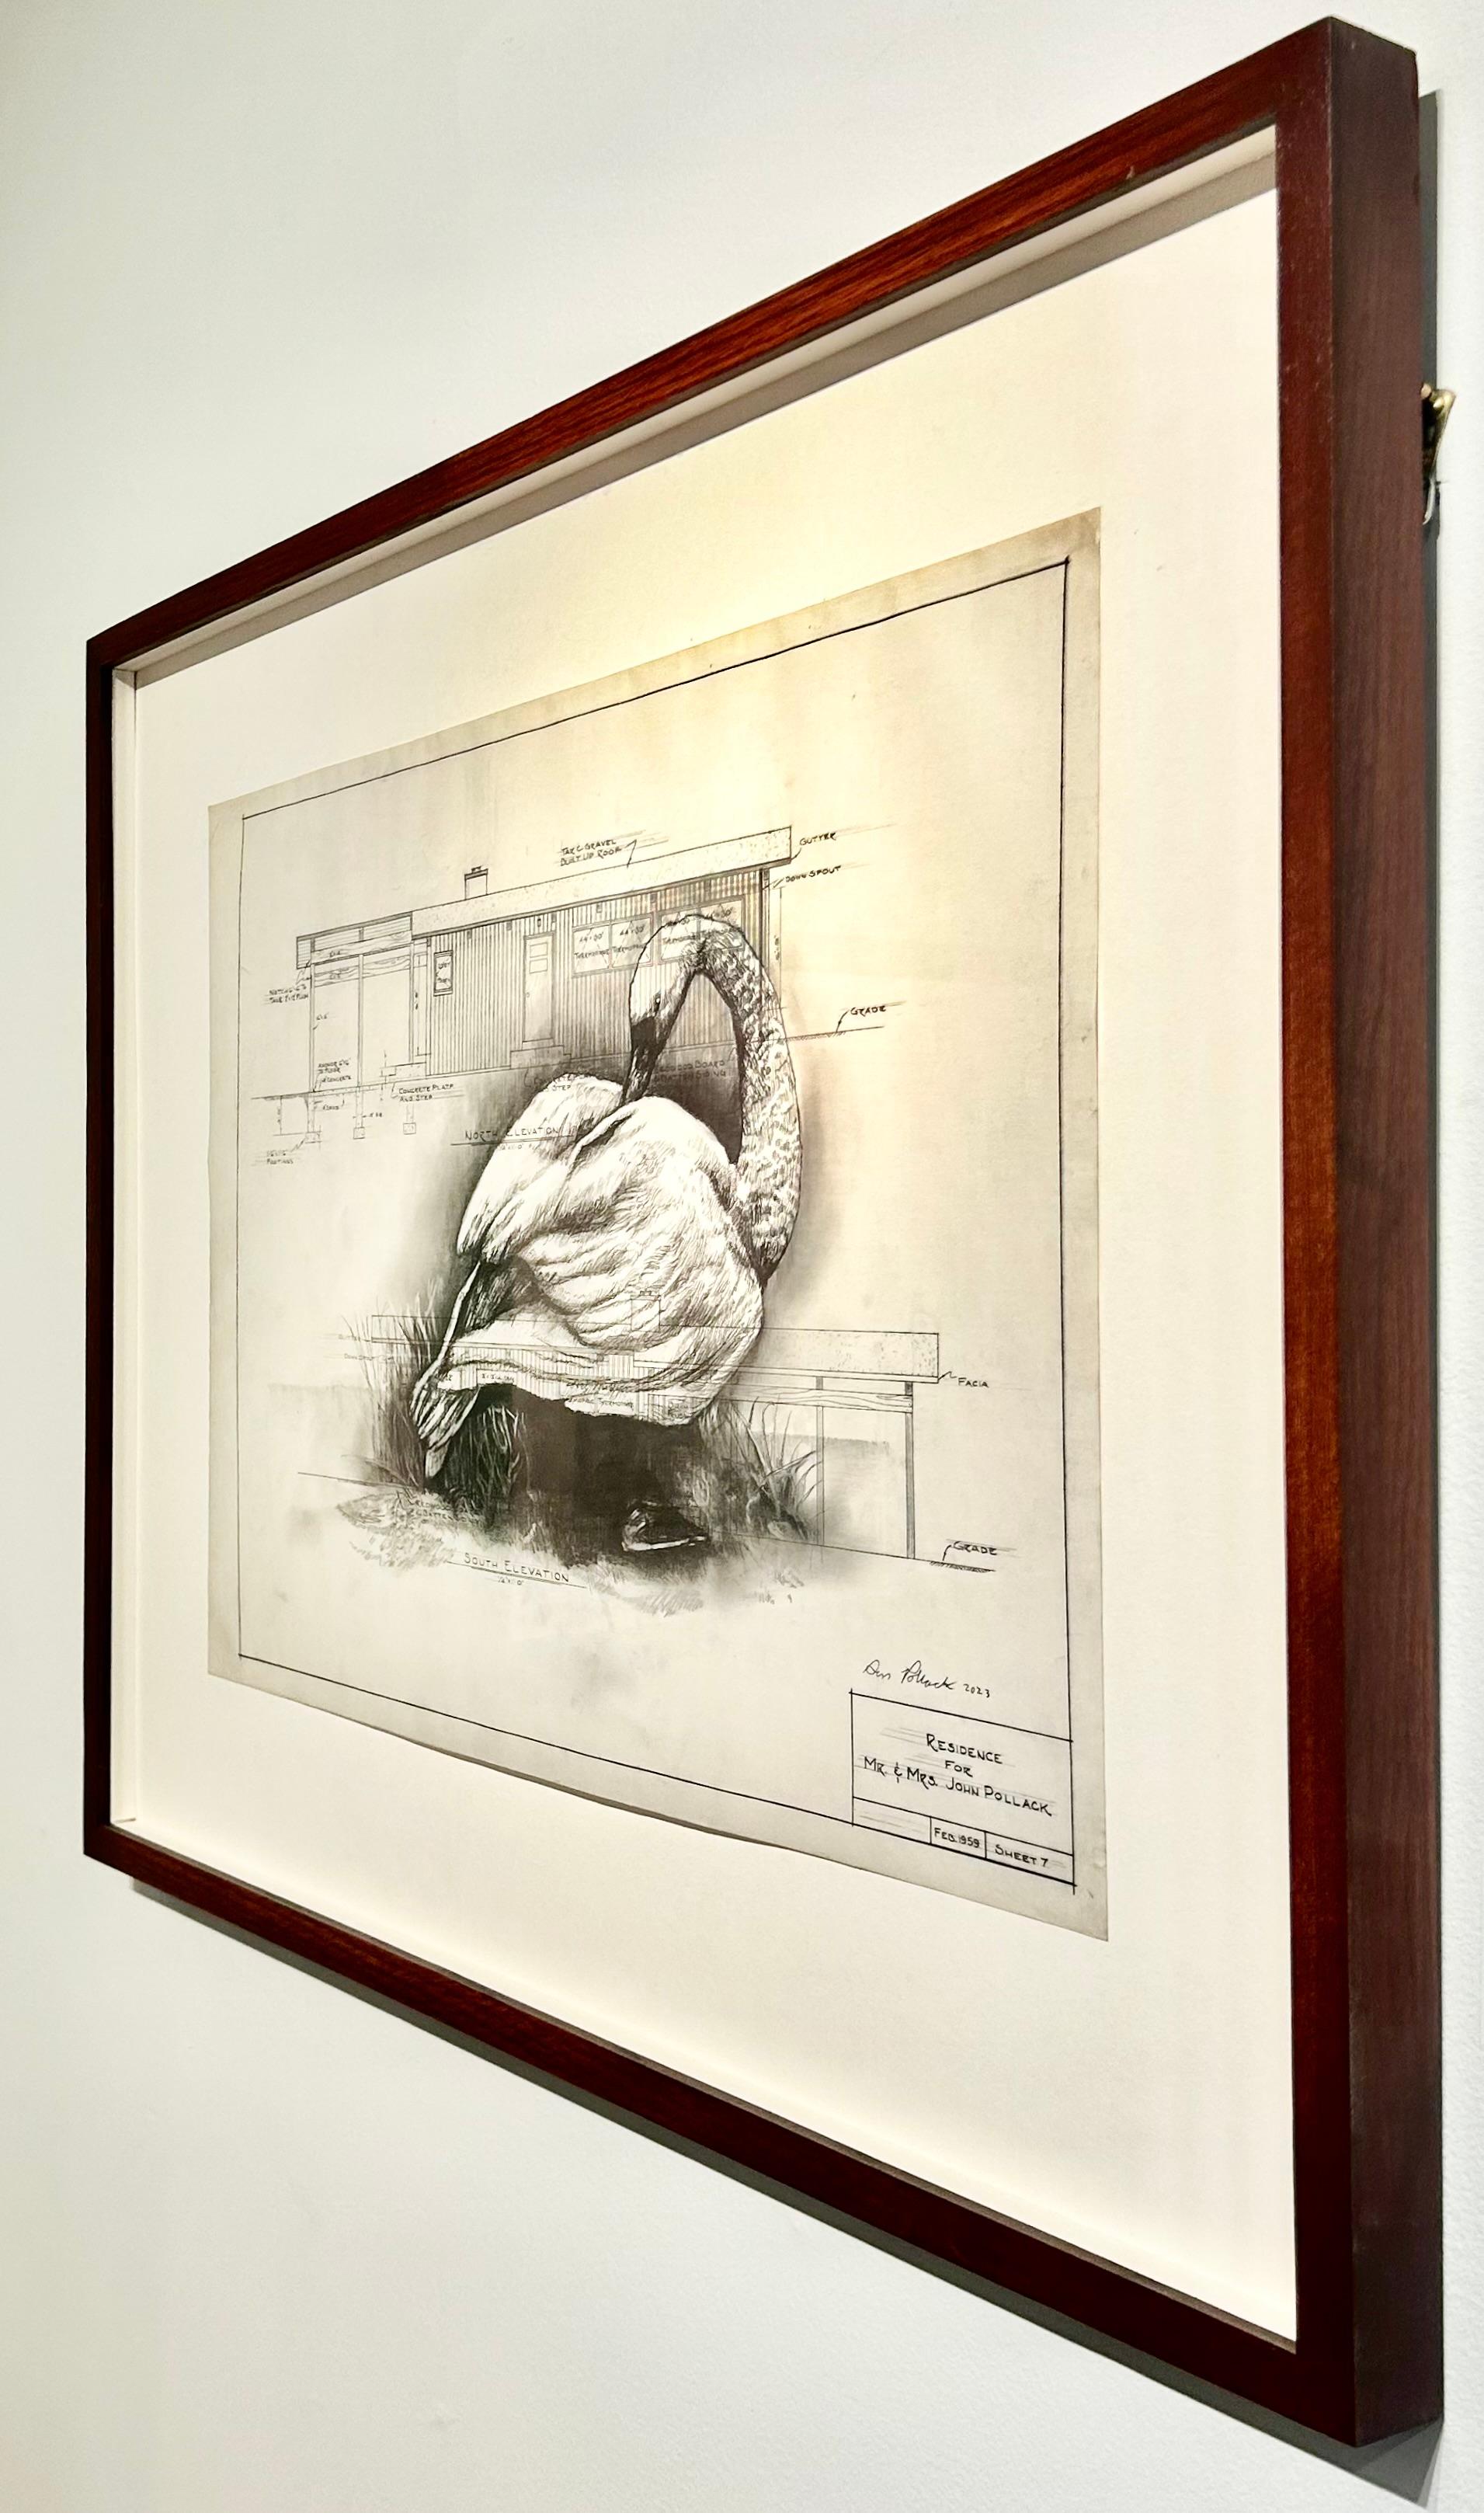 Transformed - Swan in Graphite on Antique Architectural Drawings  - Contemporary Art by Don Pollack